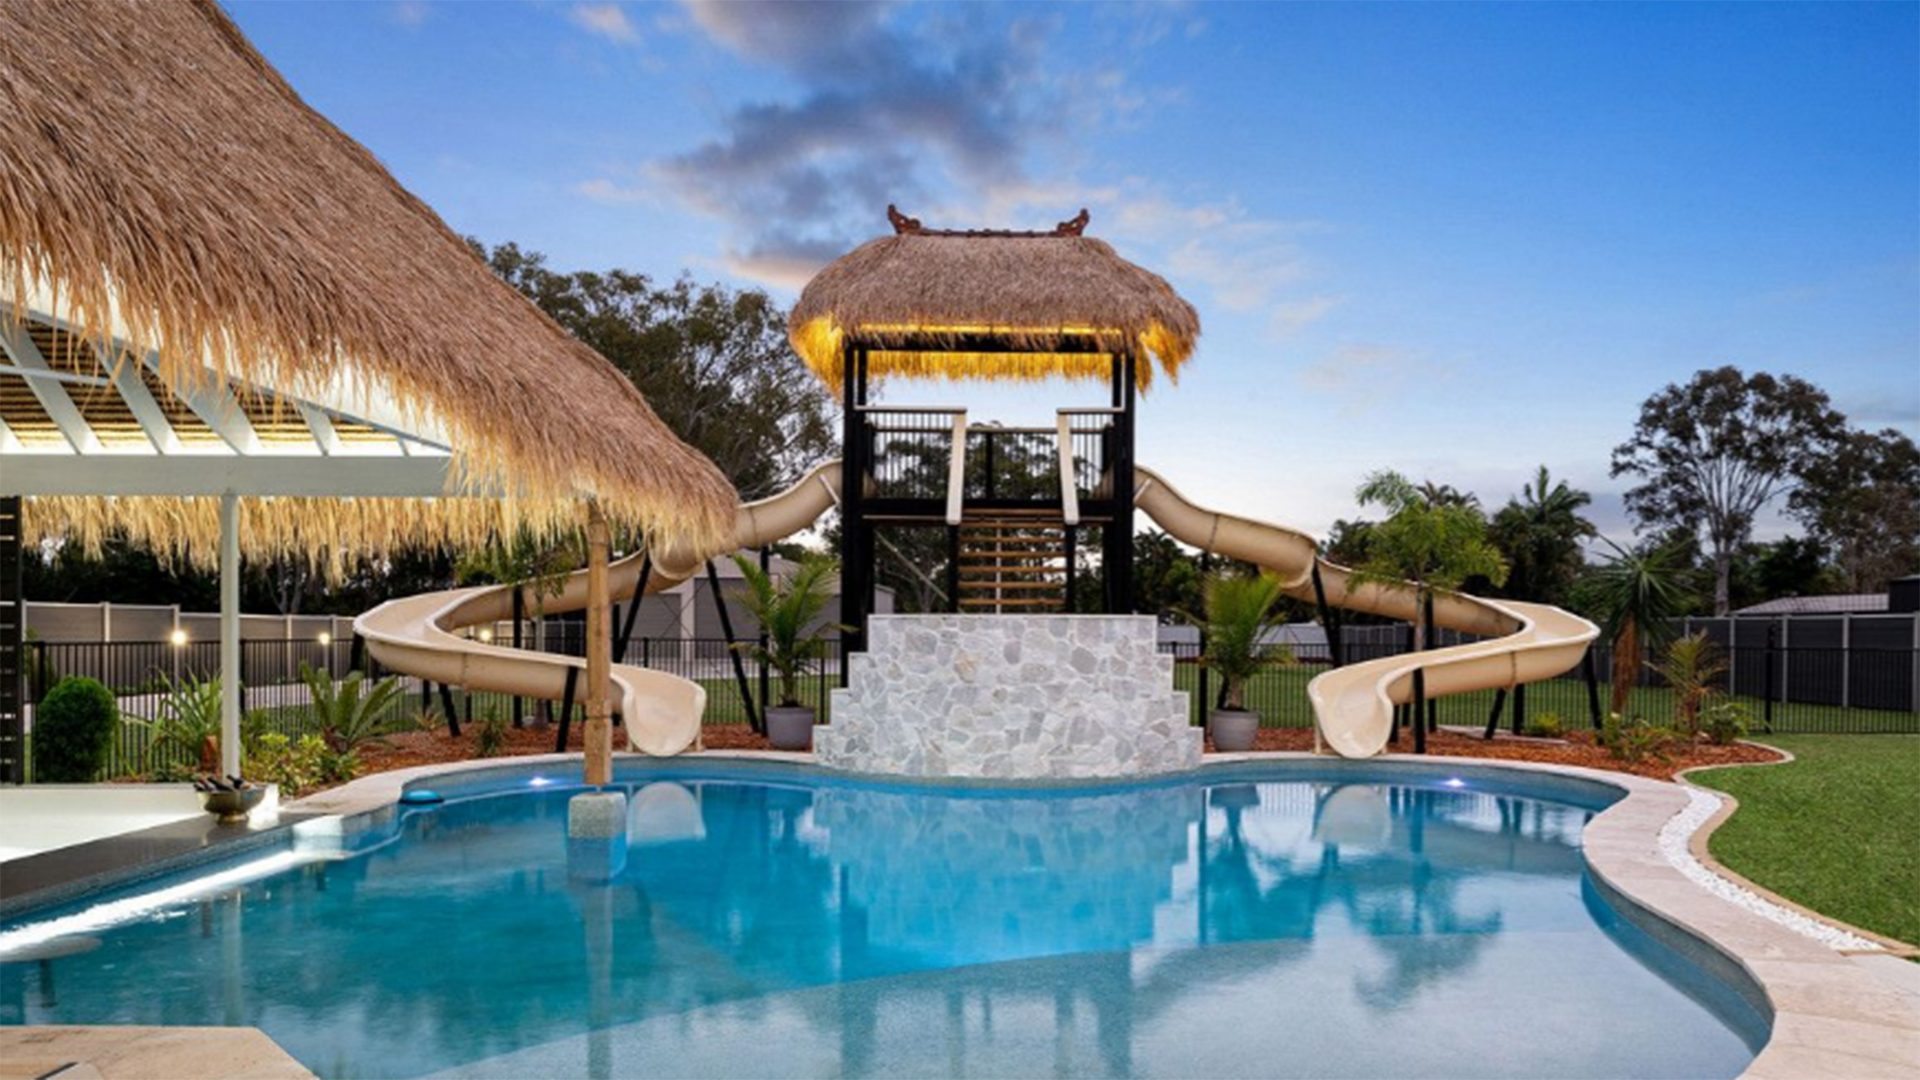 Resort-style home with its own water park sells fetches $2.1 million